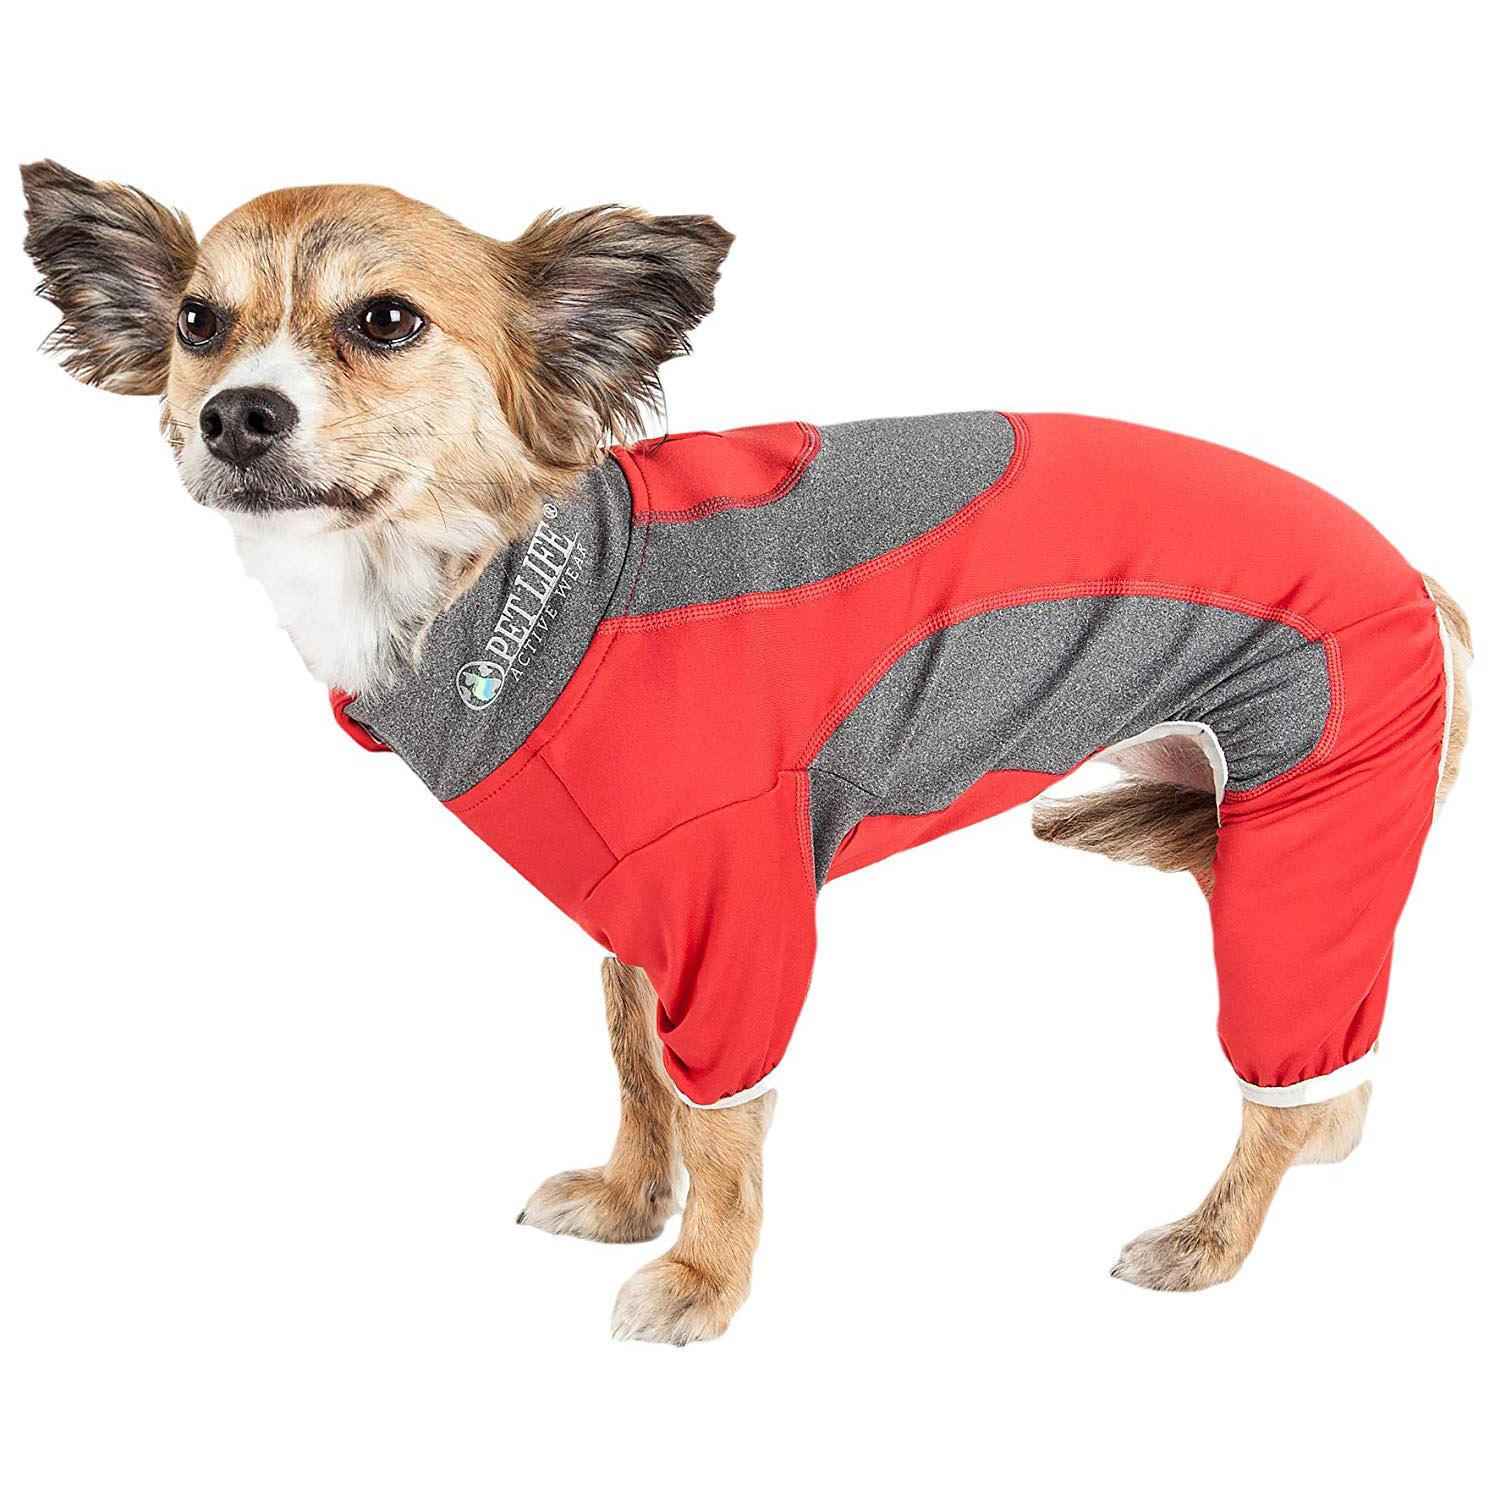 Pet Life ACTIVE Warm-Pup Performance Jumpsuit - Red and Gray